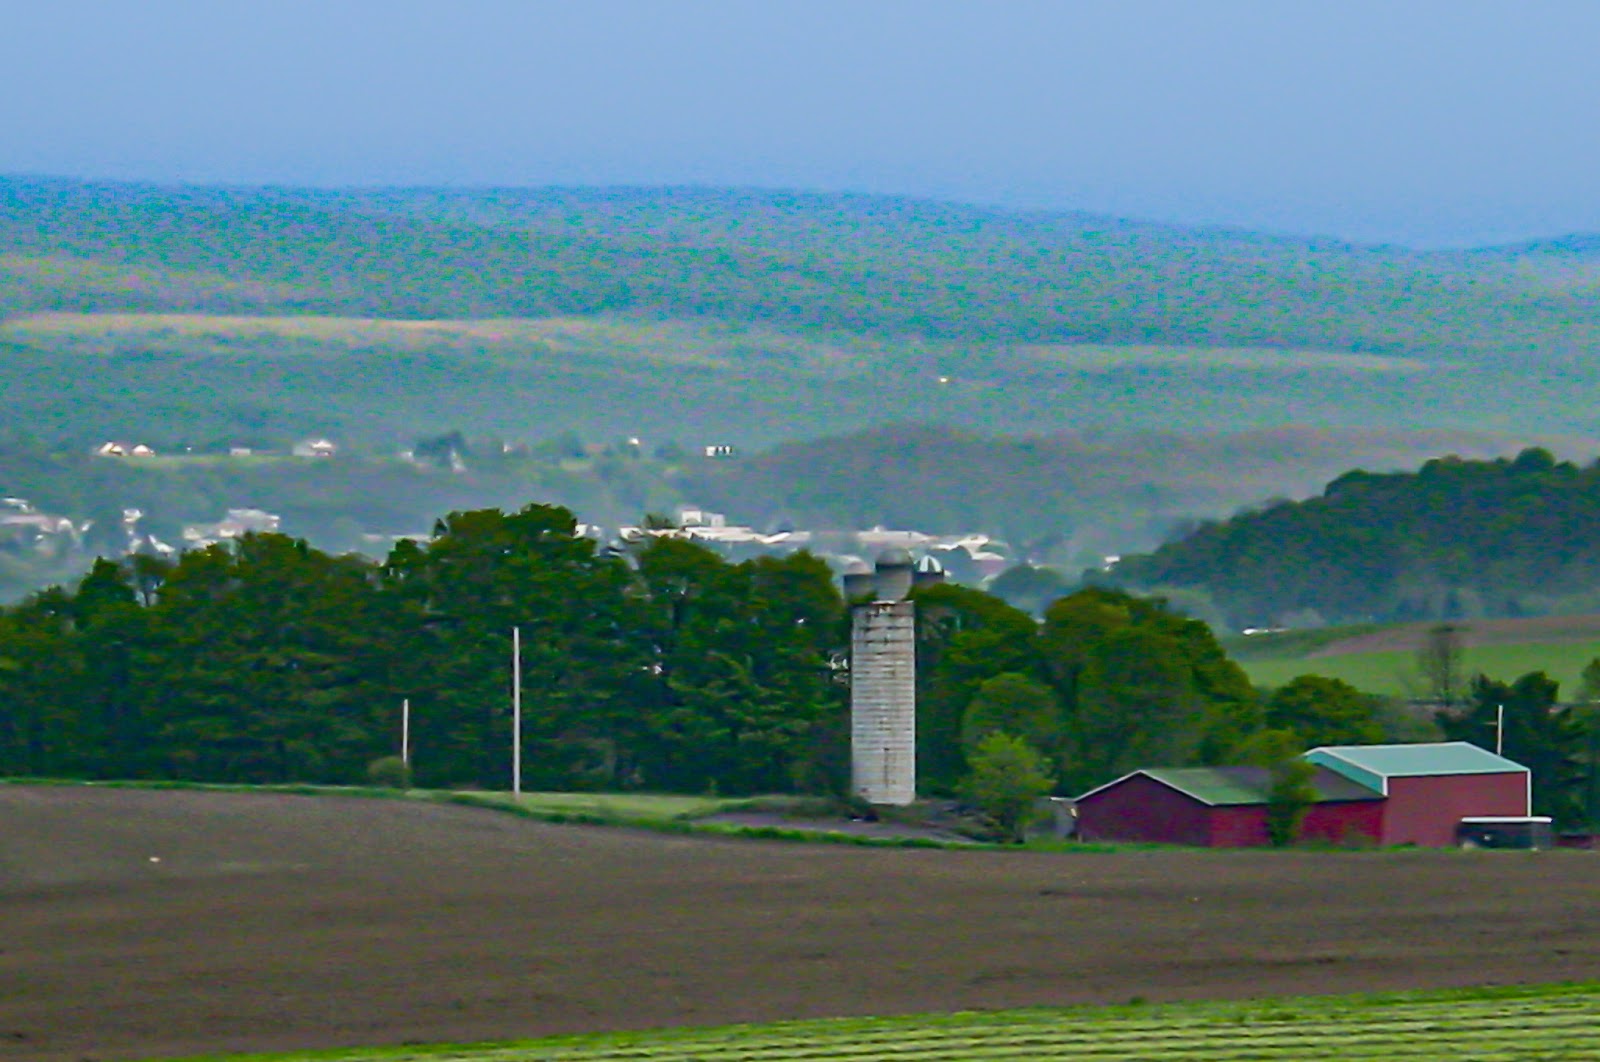 A plowed field, silo and red barn  in the foreground with a community in the distance and low hills. 